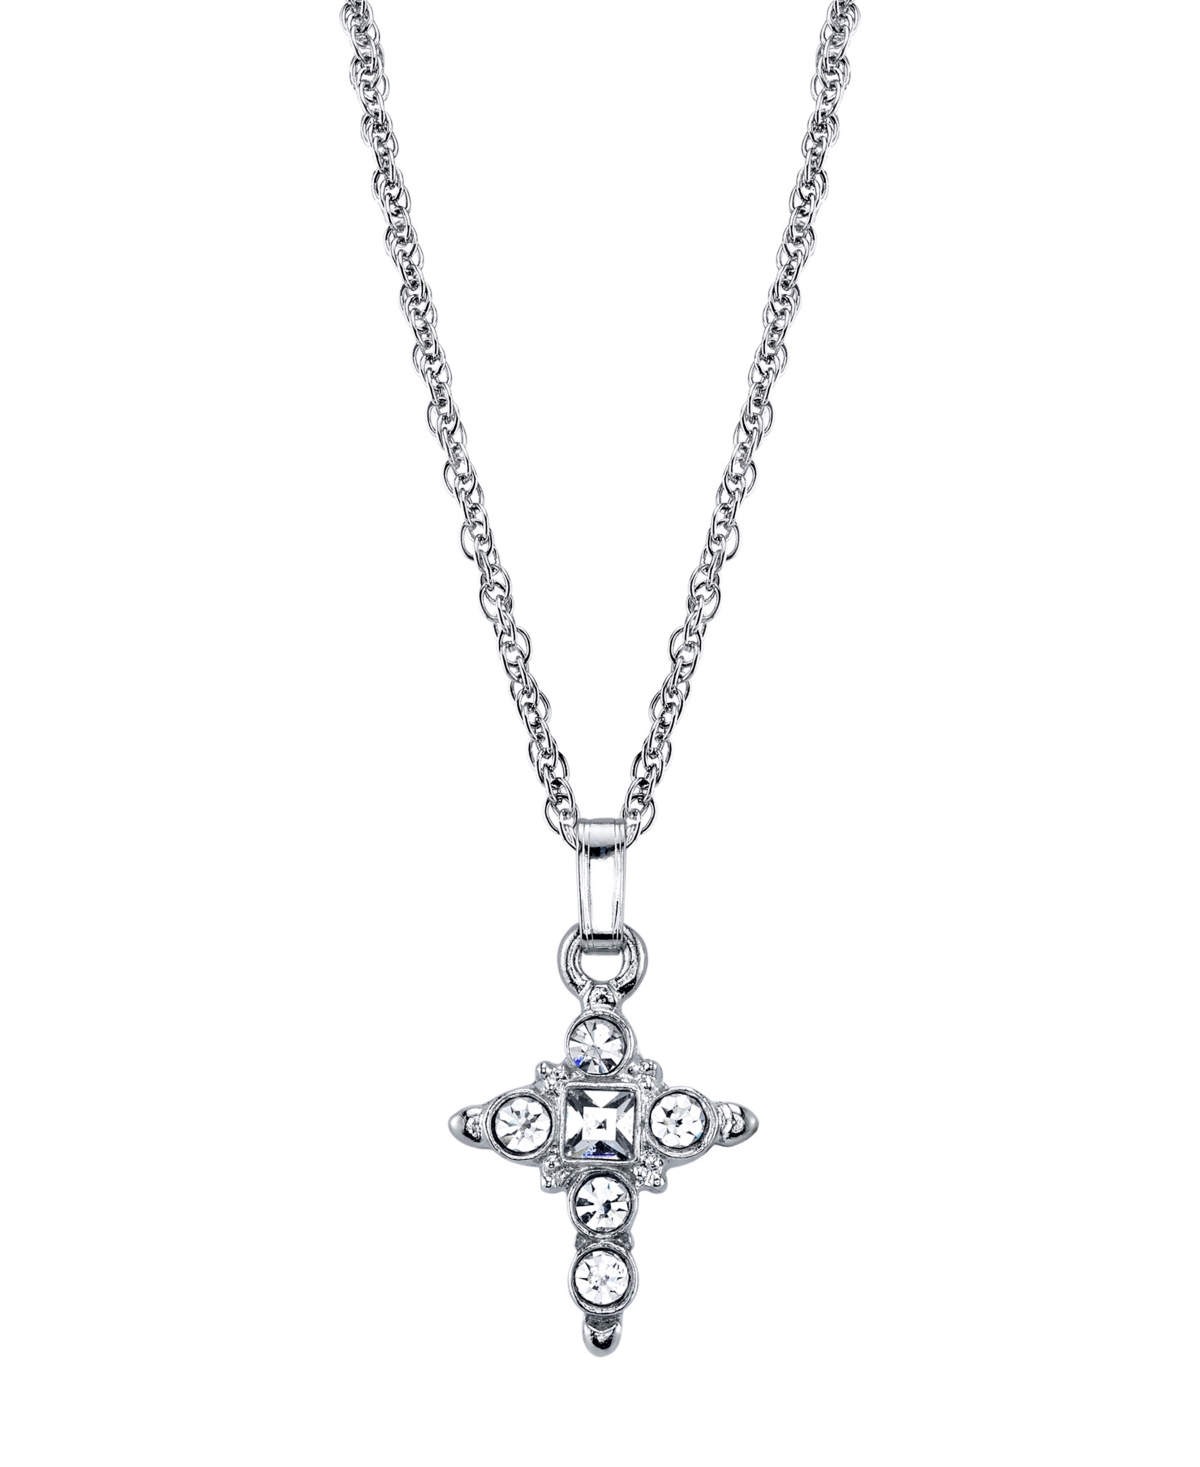 2028 Silver Tone Crystal Cross Pendant Necklace 16" Adjustable In White